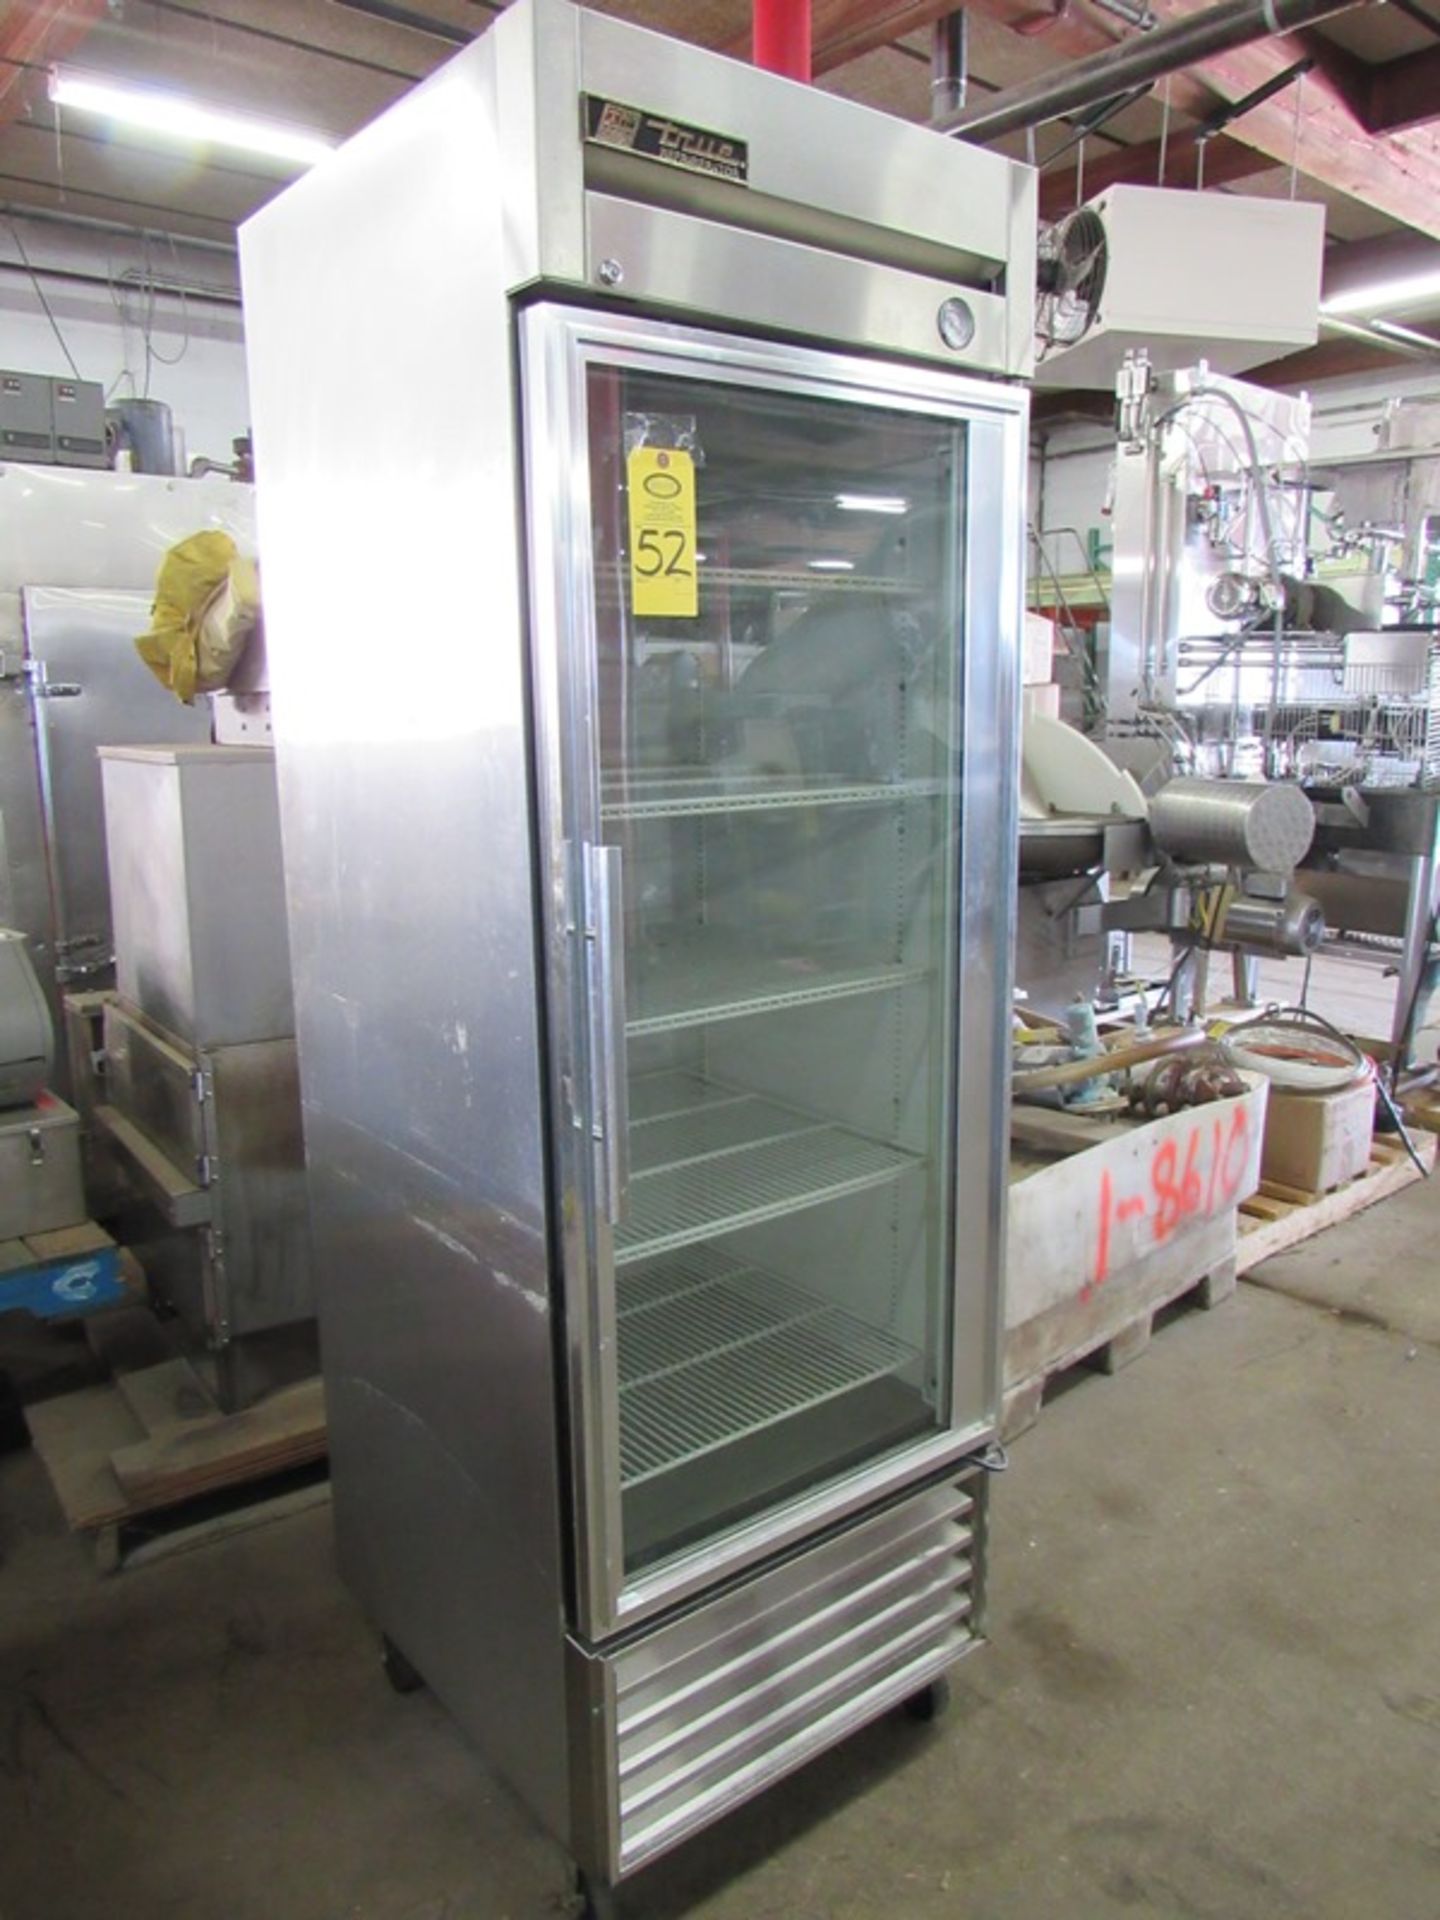 True Mdl T-23G Refrigerator, one section reach-in, glass door, (5) shelves, 23, cu. ft., 120 volts - Image 2 of 5